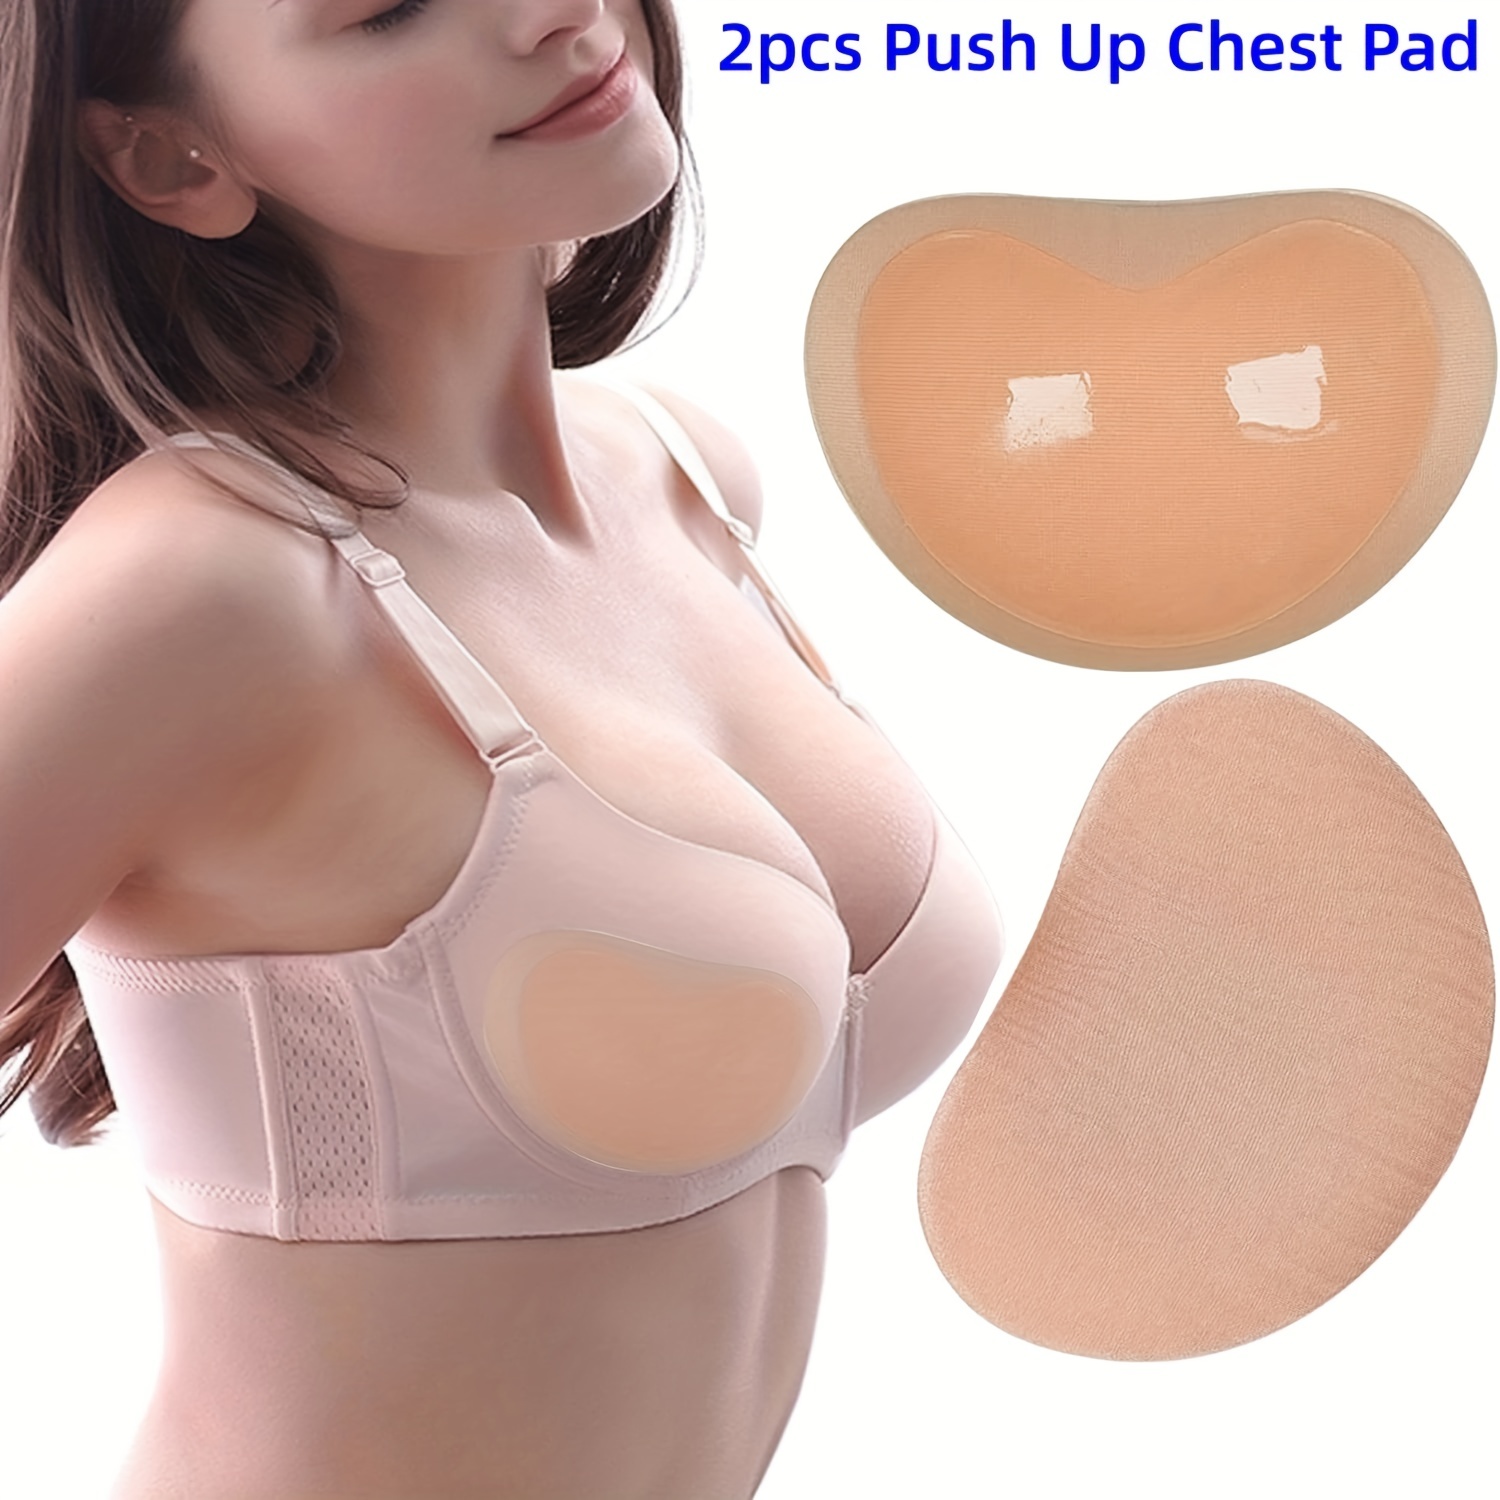 Triangle Thickened Bra Pad Inserts Push Up Chest Pads for Sport